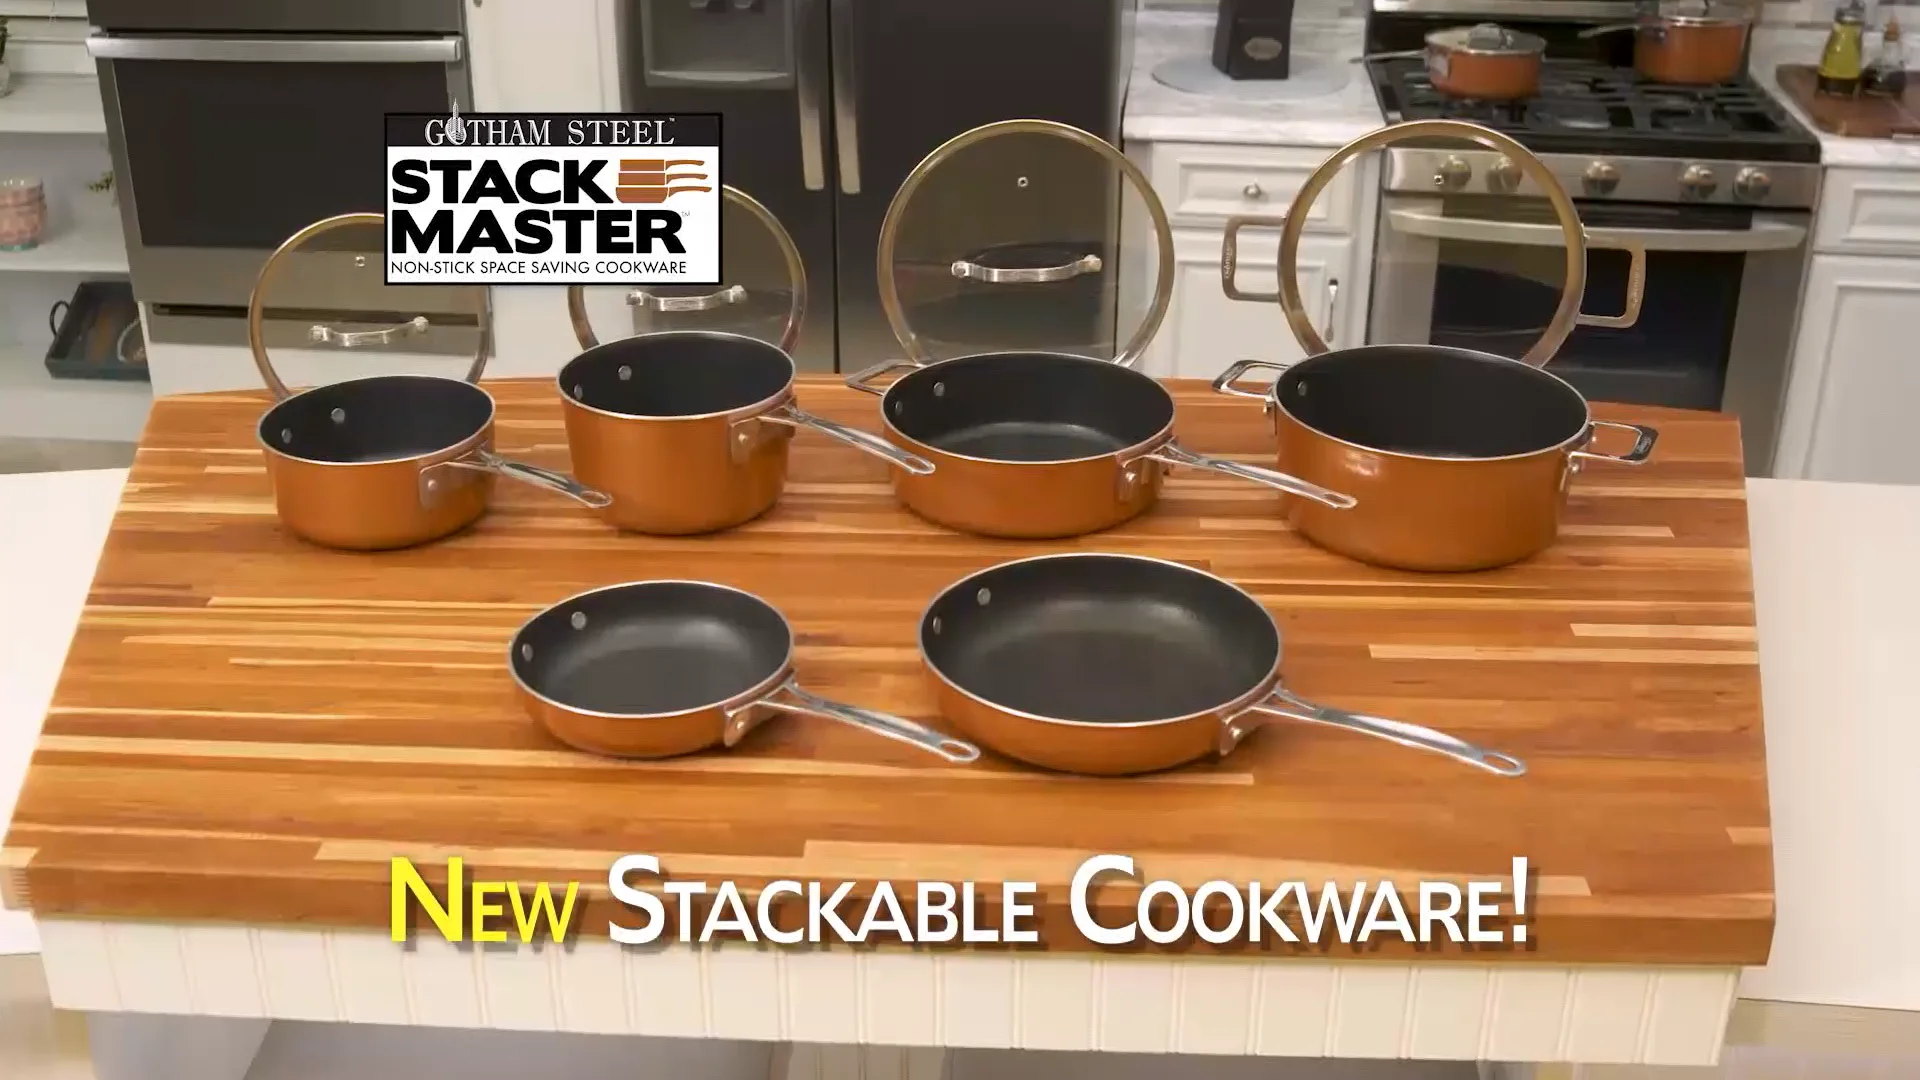 Gotham Steel Stackmaster Official Commercial